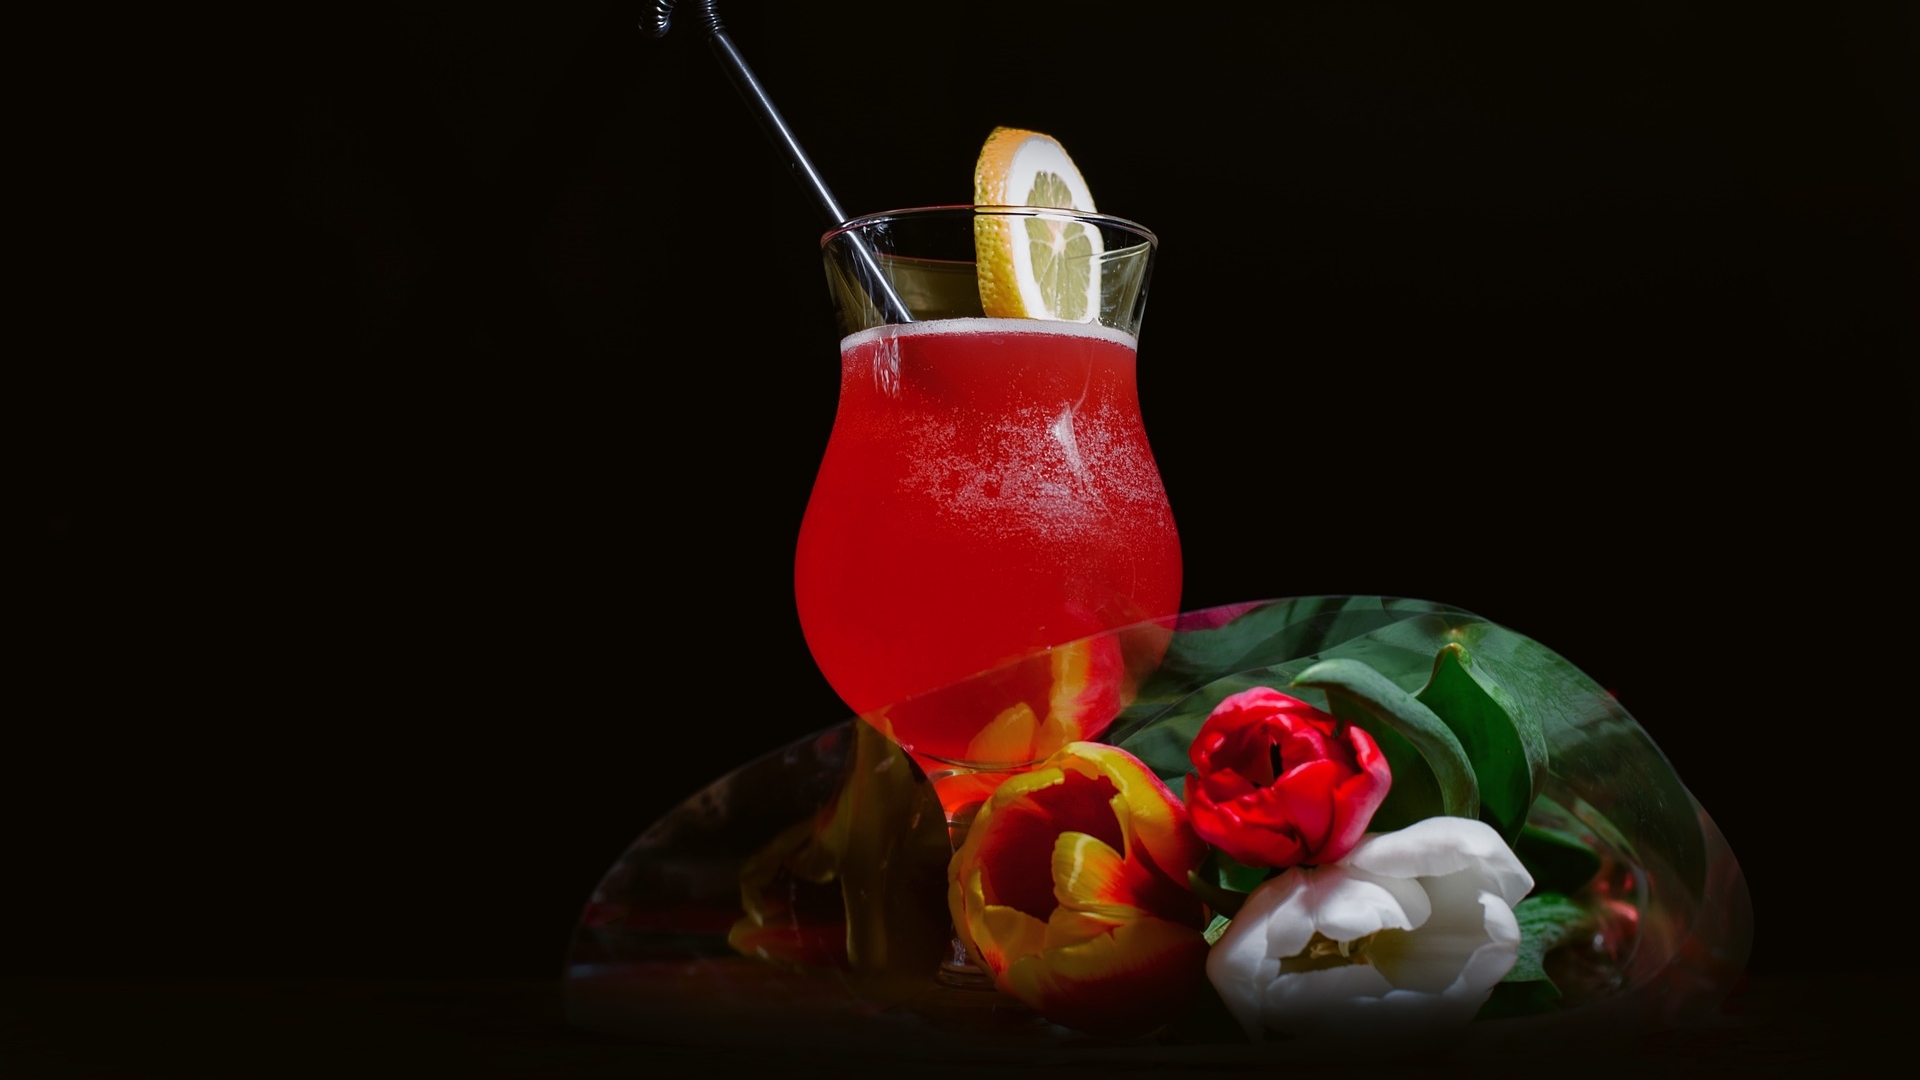 Cocktail Drink And Flowers With Black Background - Cocktail - HD Wallpaper 